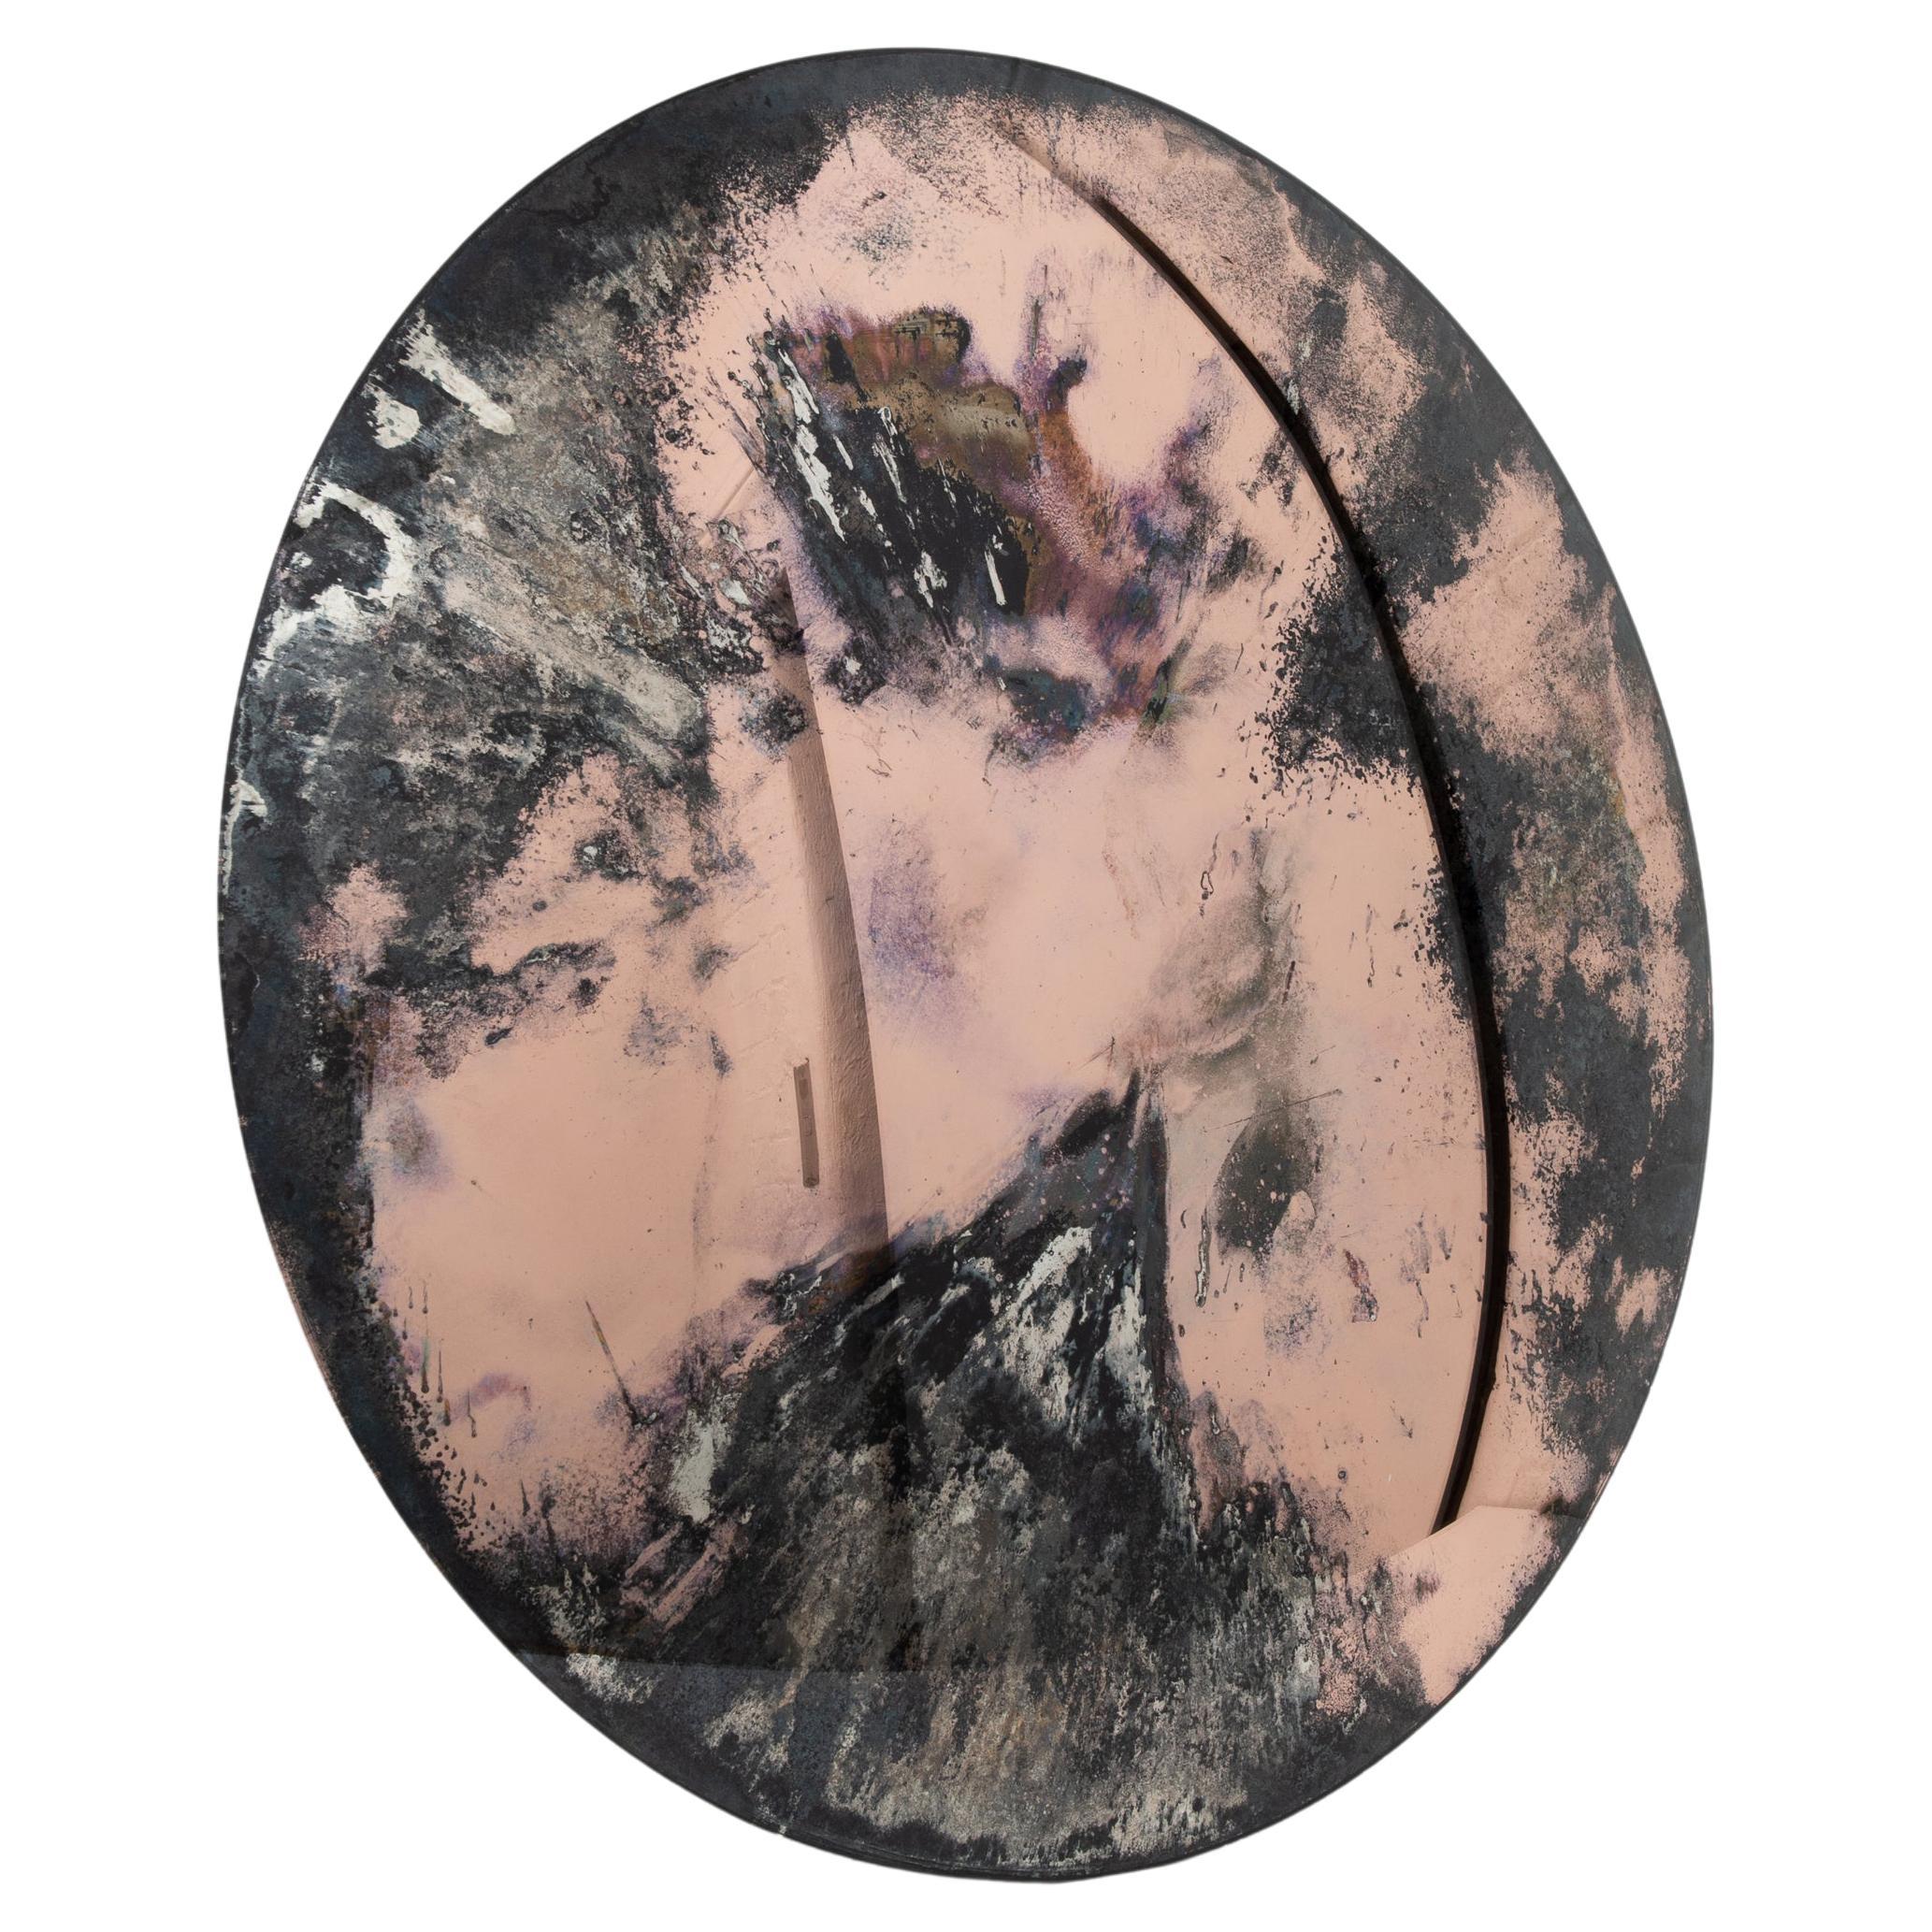 In Stock Orbis Convex Antiqued Rose Gold Frameless Round Mirror, Large For Sale